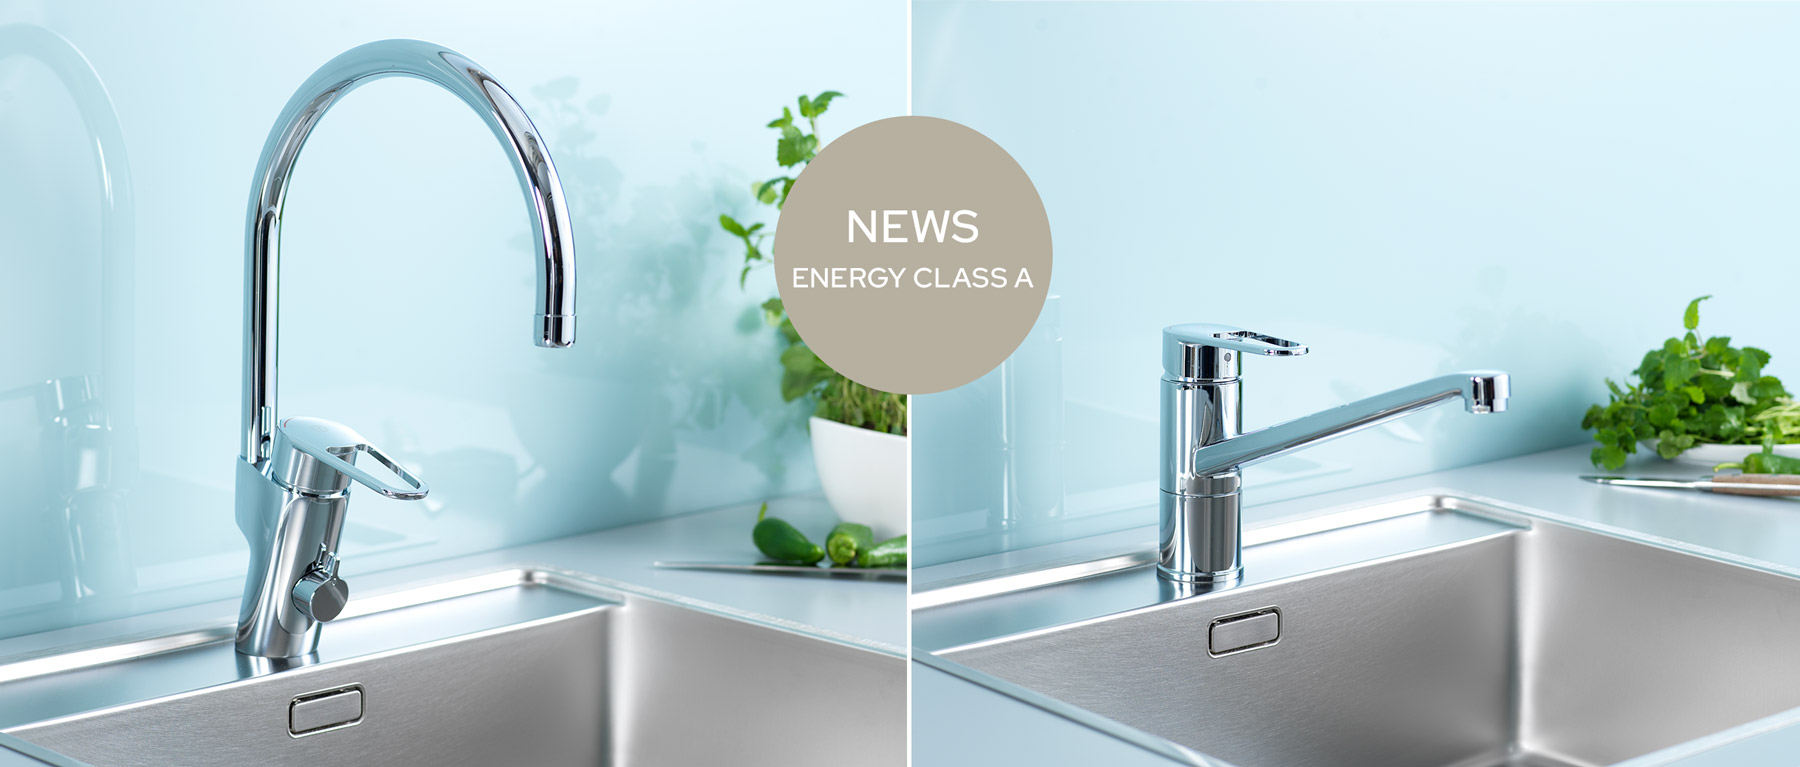 Gustavsberg launches the market's first kitchen mixers with Energy Class A